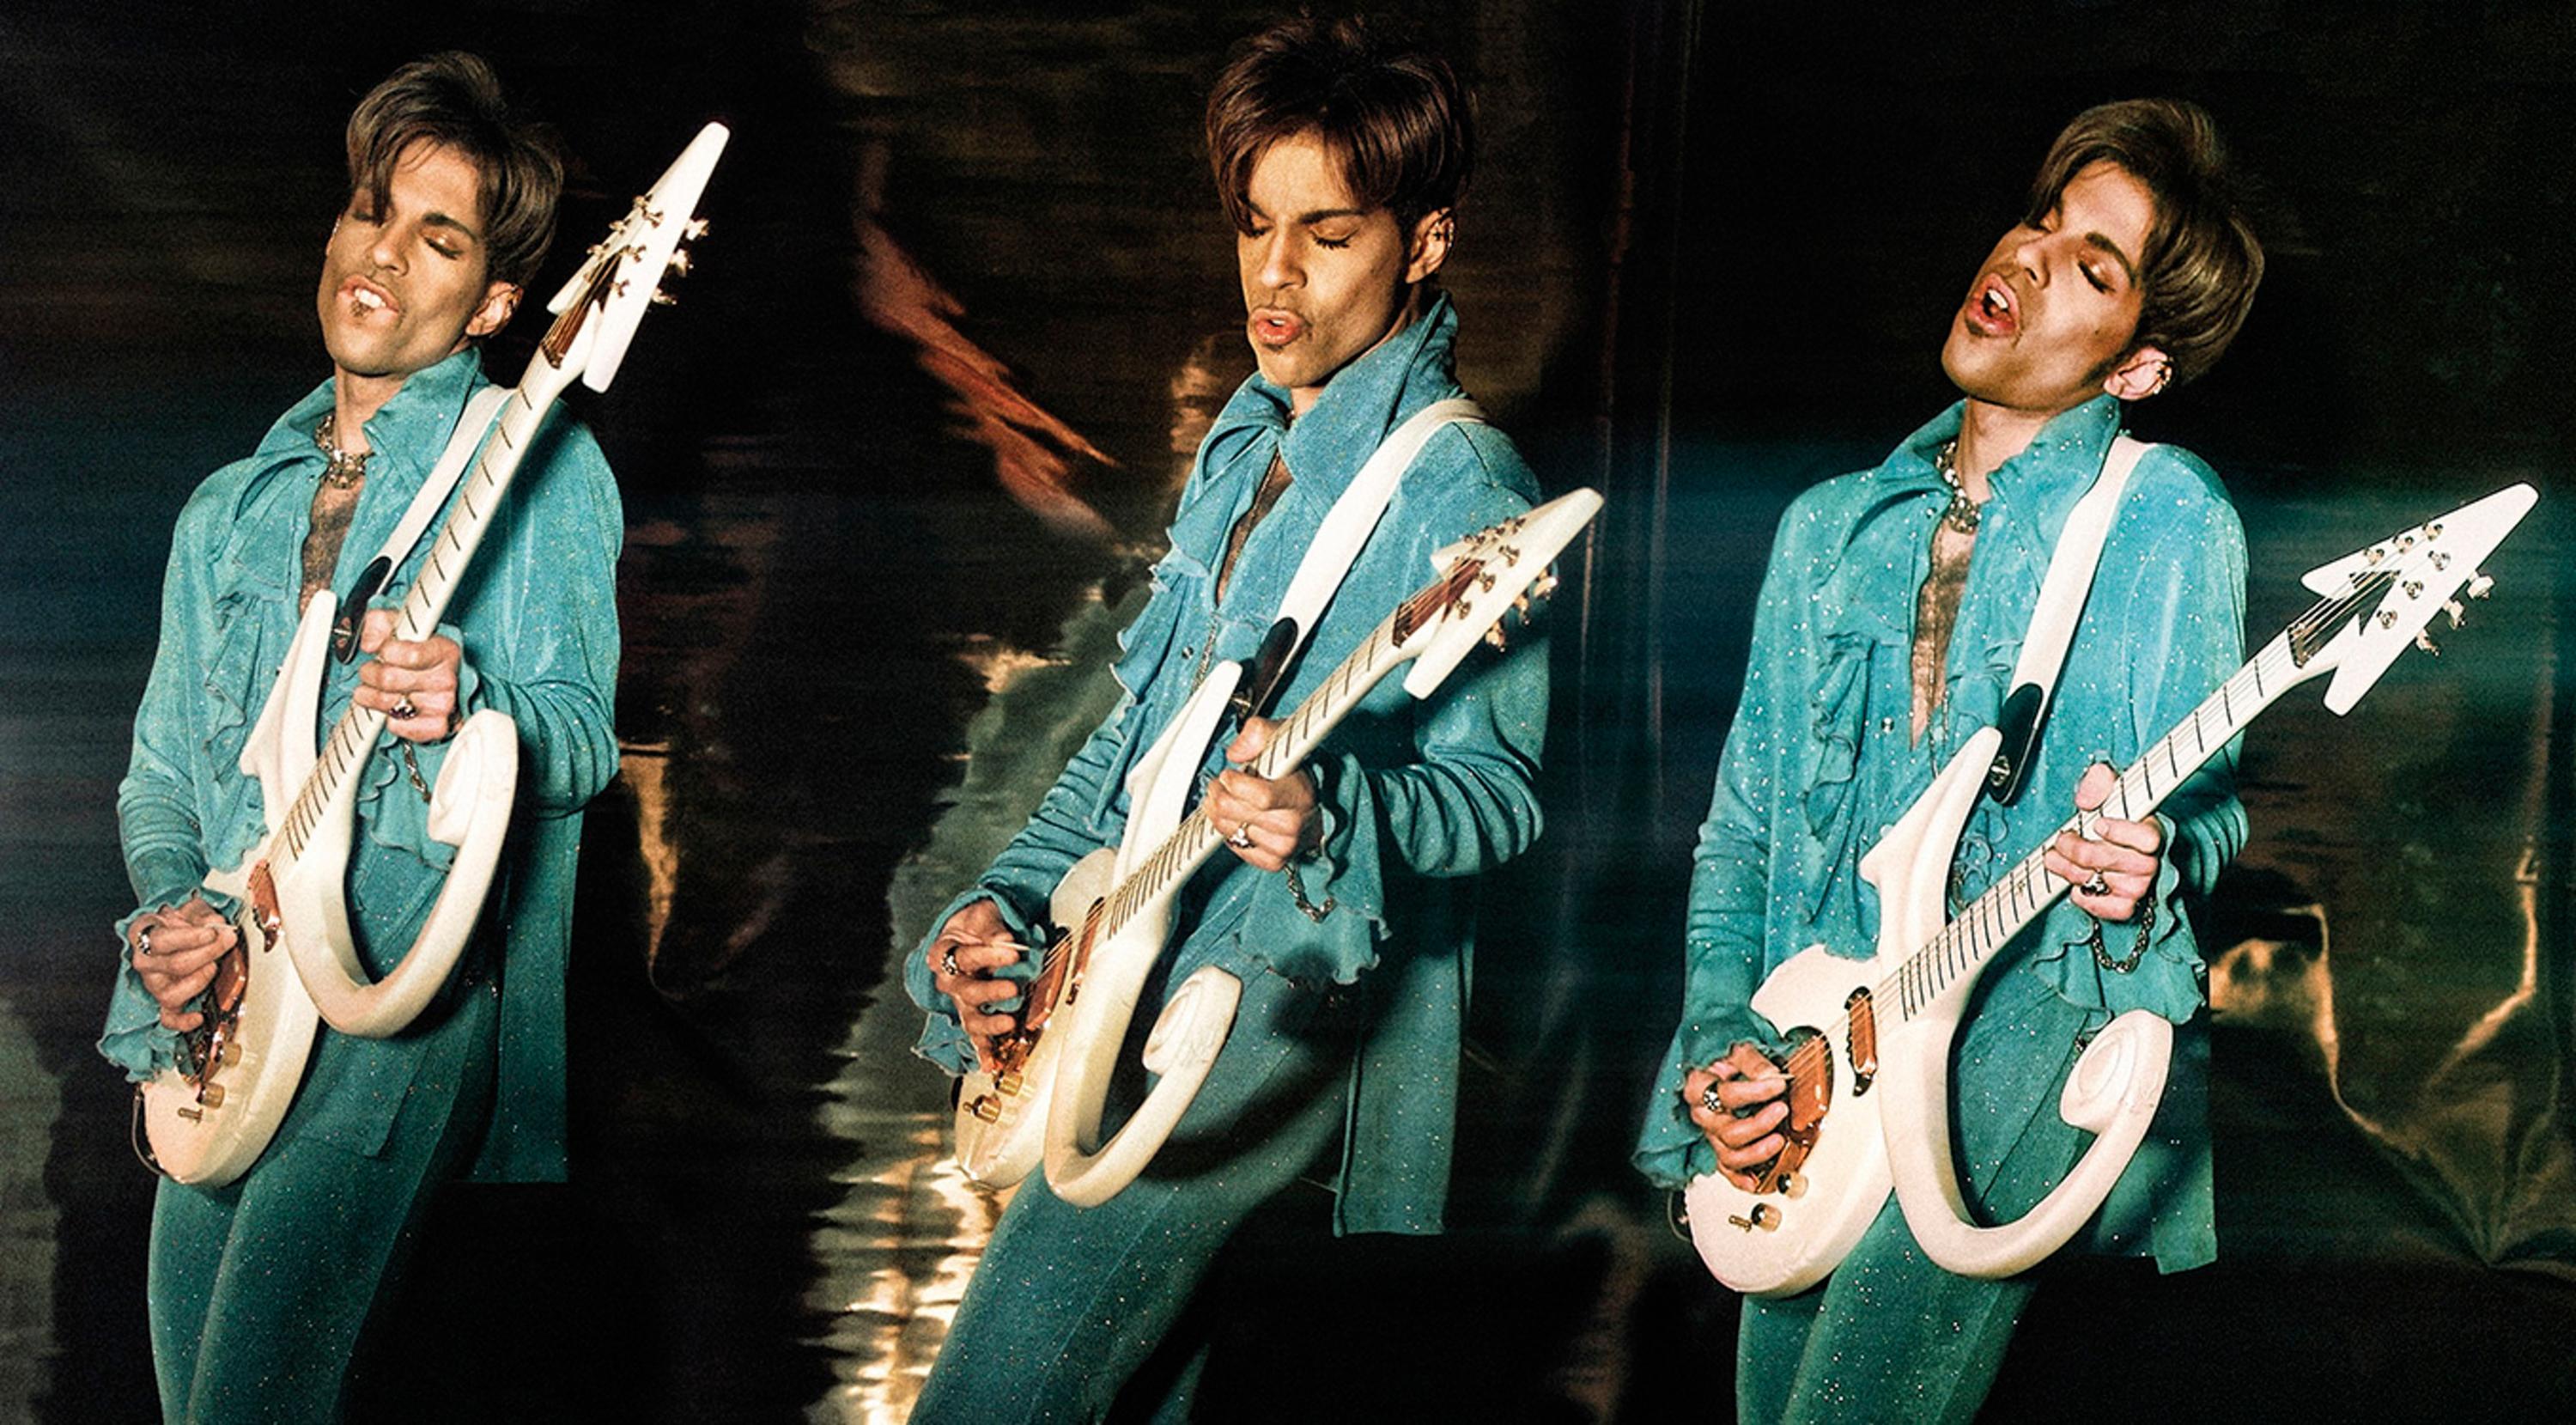 Title: Prince with Schecter White Symbol Electric Guitar

Portrait of American singer-songwriter, multi-instrumentalist and record producer, Prince.

Available sizes: 
12”x16” Edition of 25
16”x20" Edition of 25
20”x24" Edition of 25
30”x40" Edition